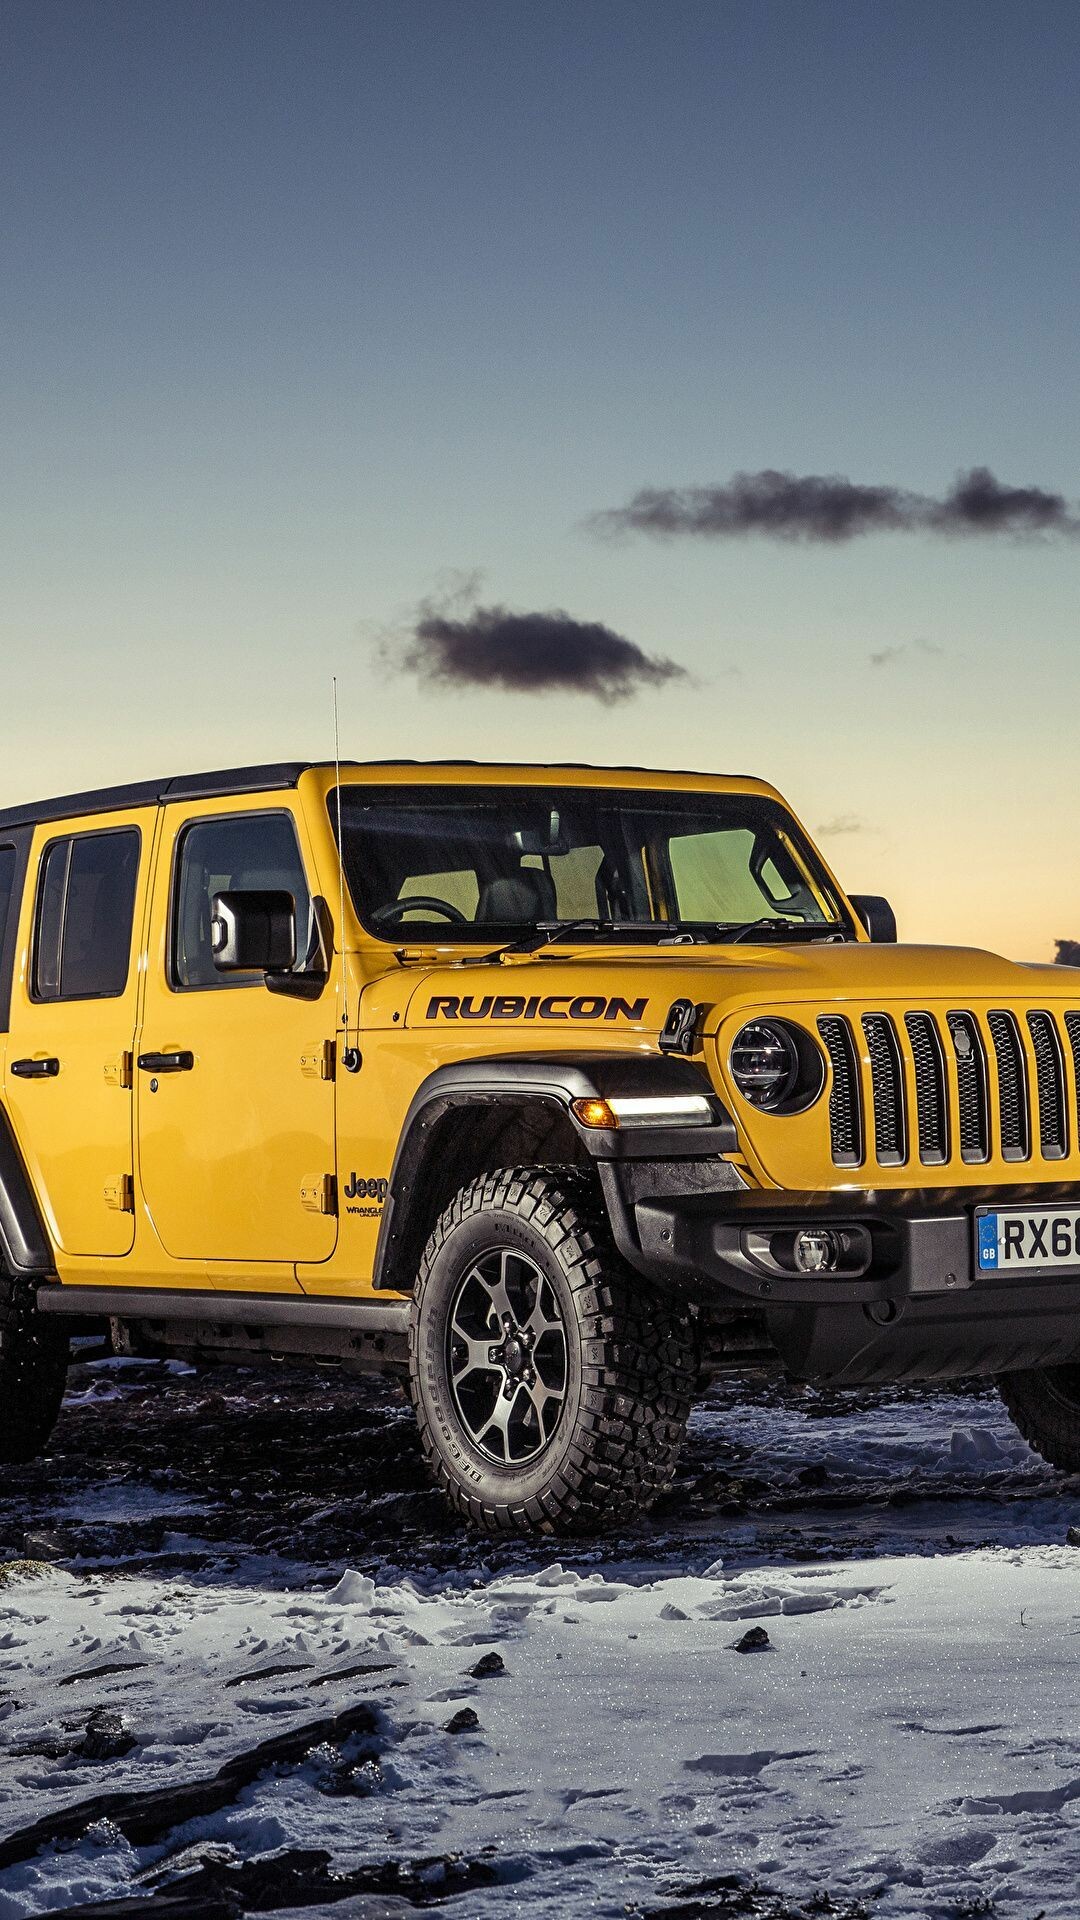 Jeep Wrangler: Rubicon, A series of American mid-size four-wheel drive off-road SUVs. 1080x1920 Full HD Wallpaper.